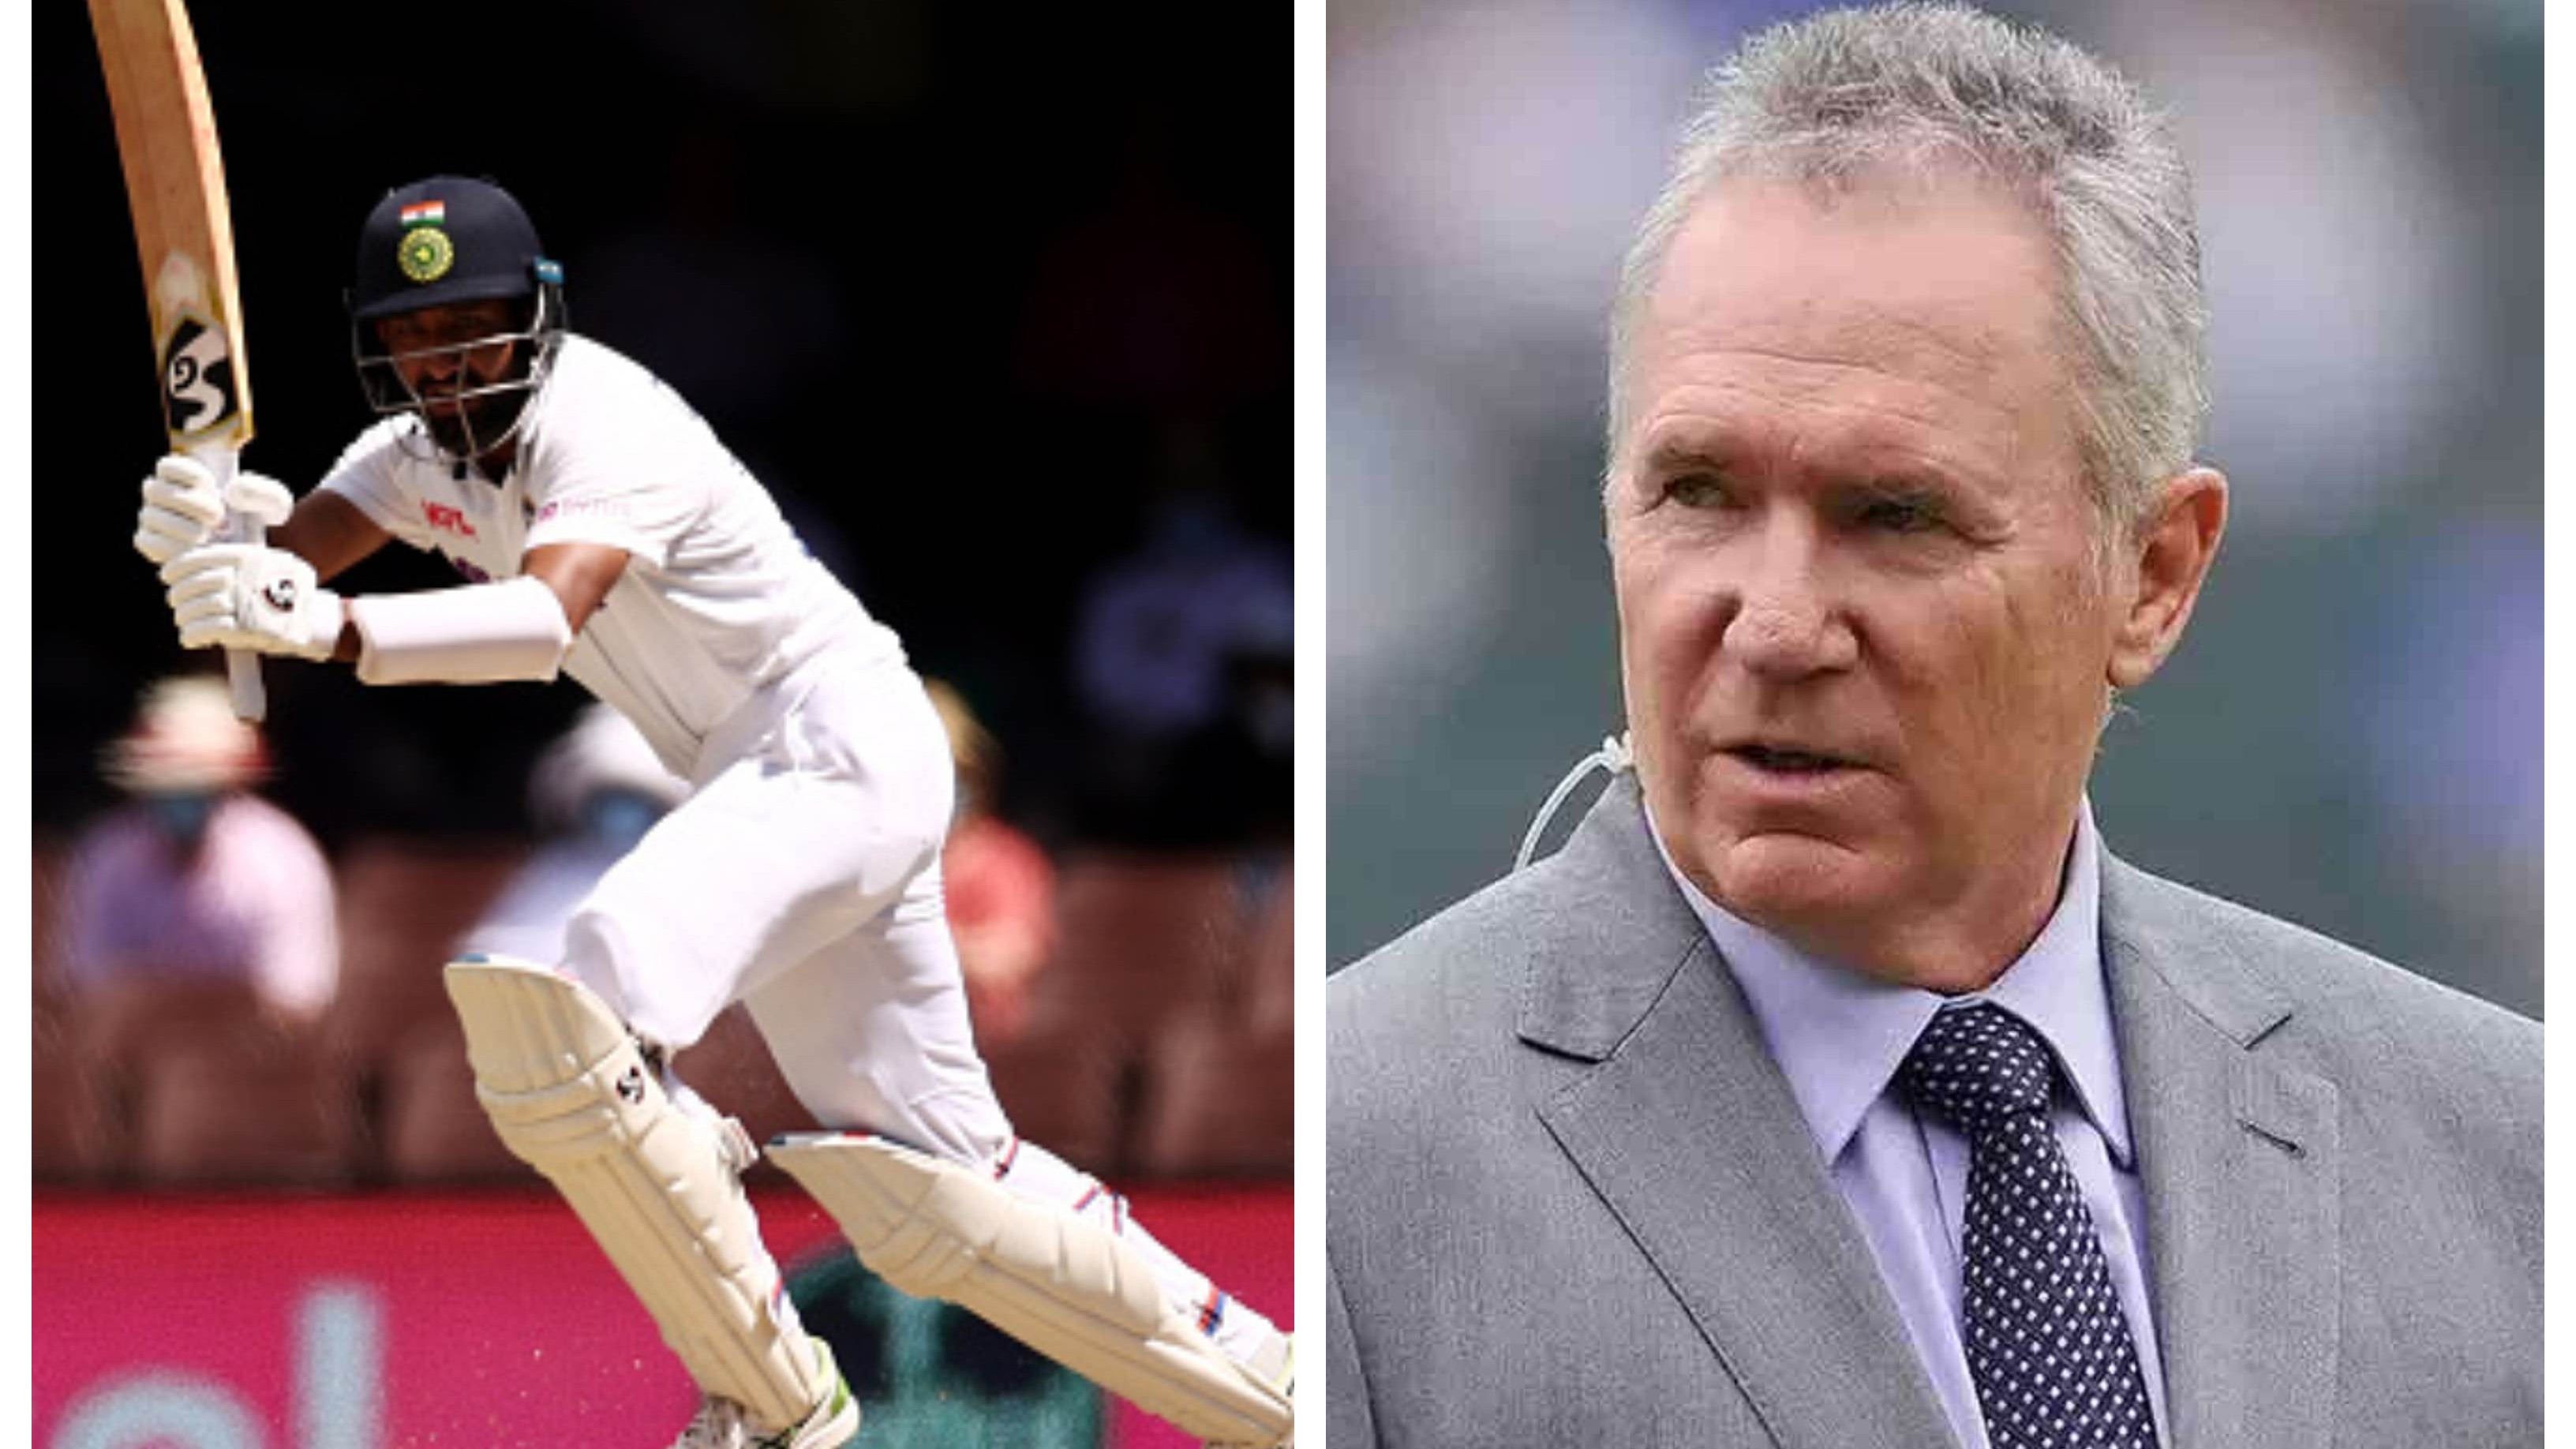 AUS v IND 2020-21: ‘He's almost scared to play a shot’, Allan Border critical of Cheteshwar Pujara’s slow approach